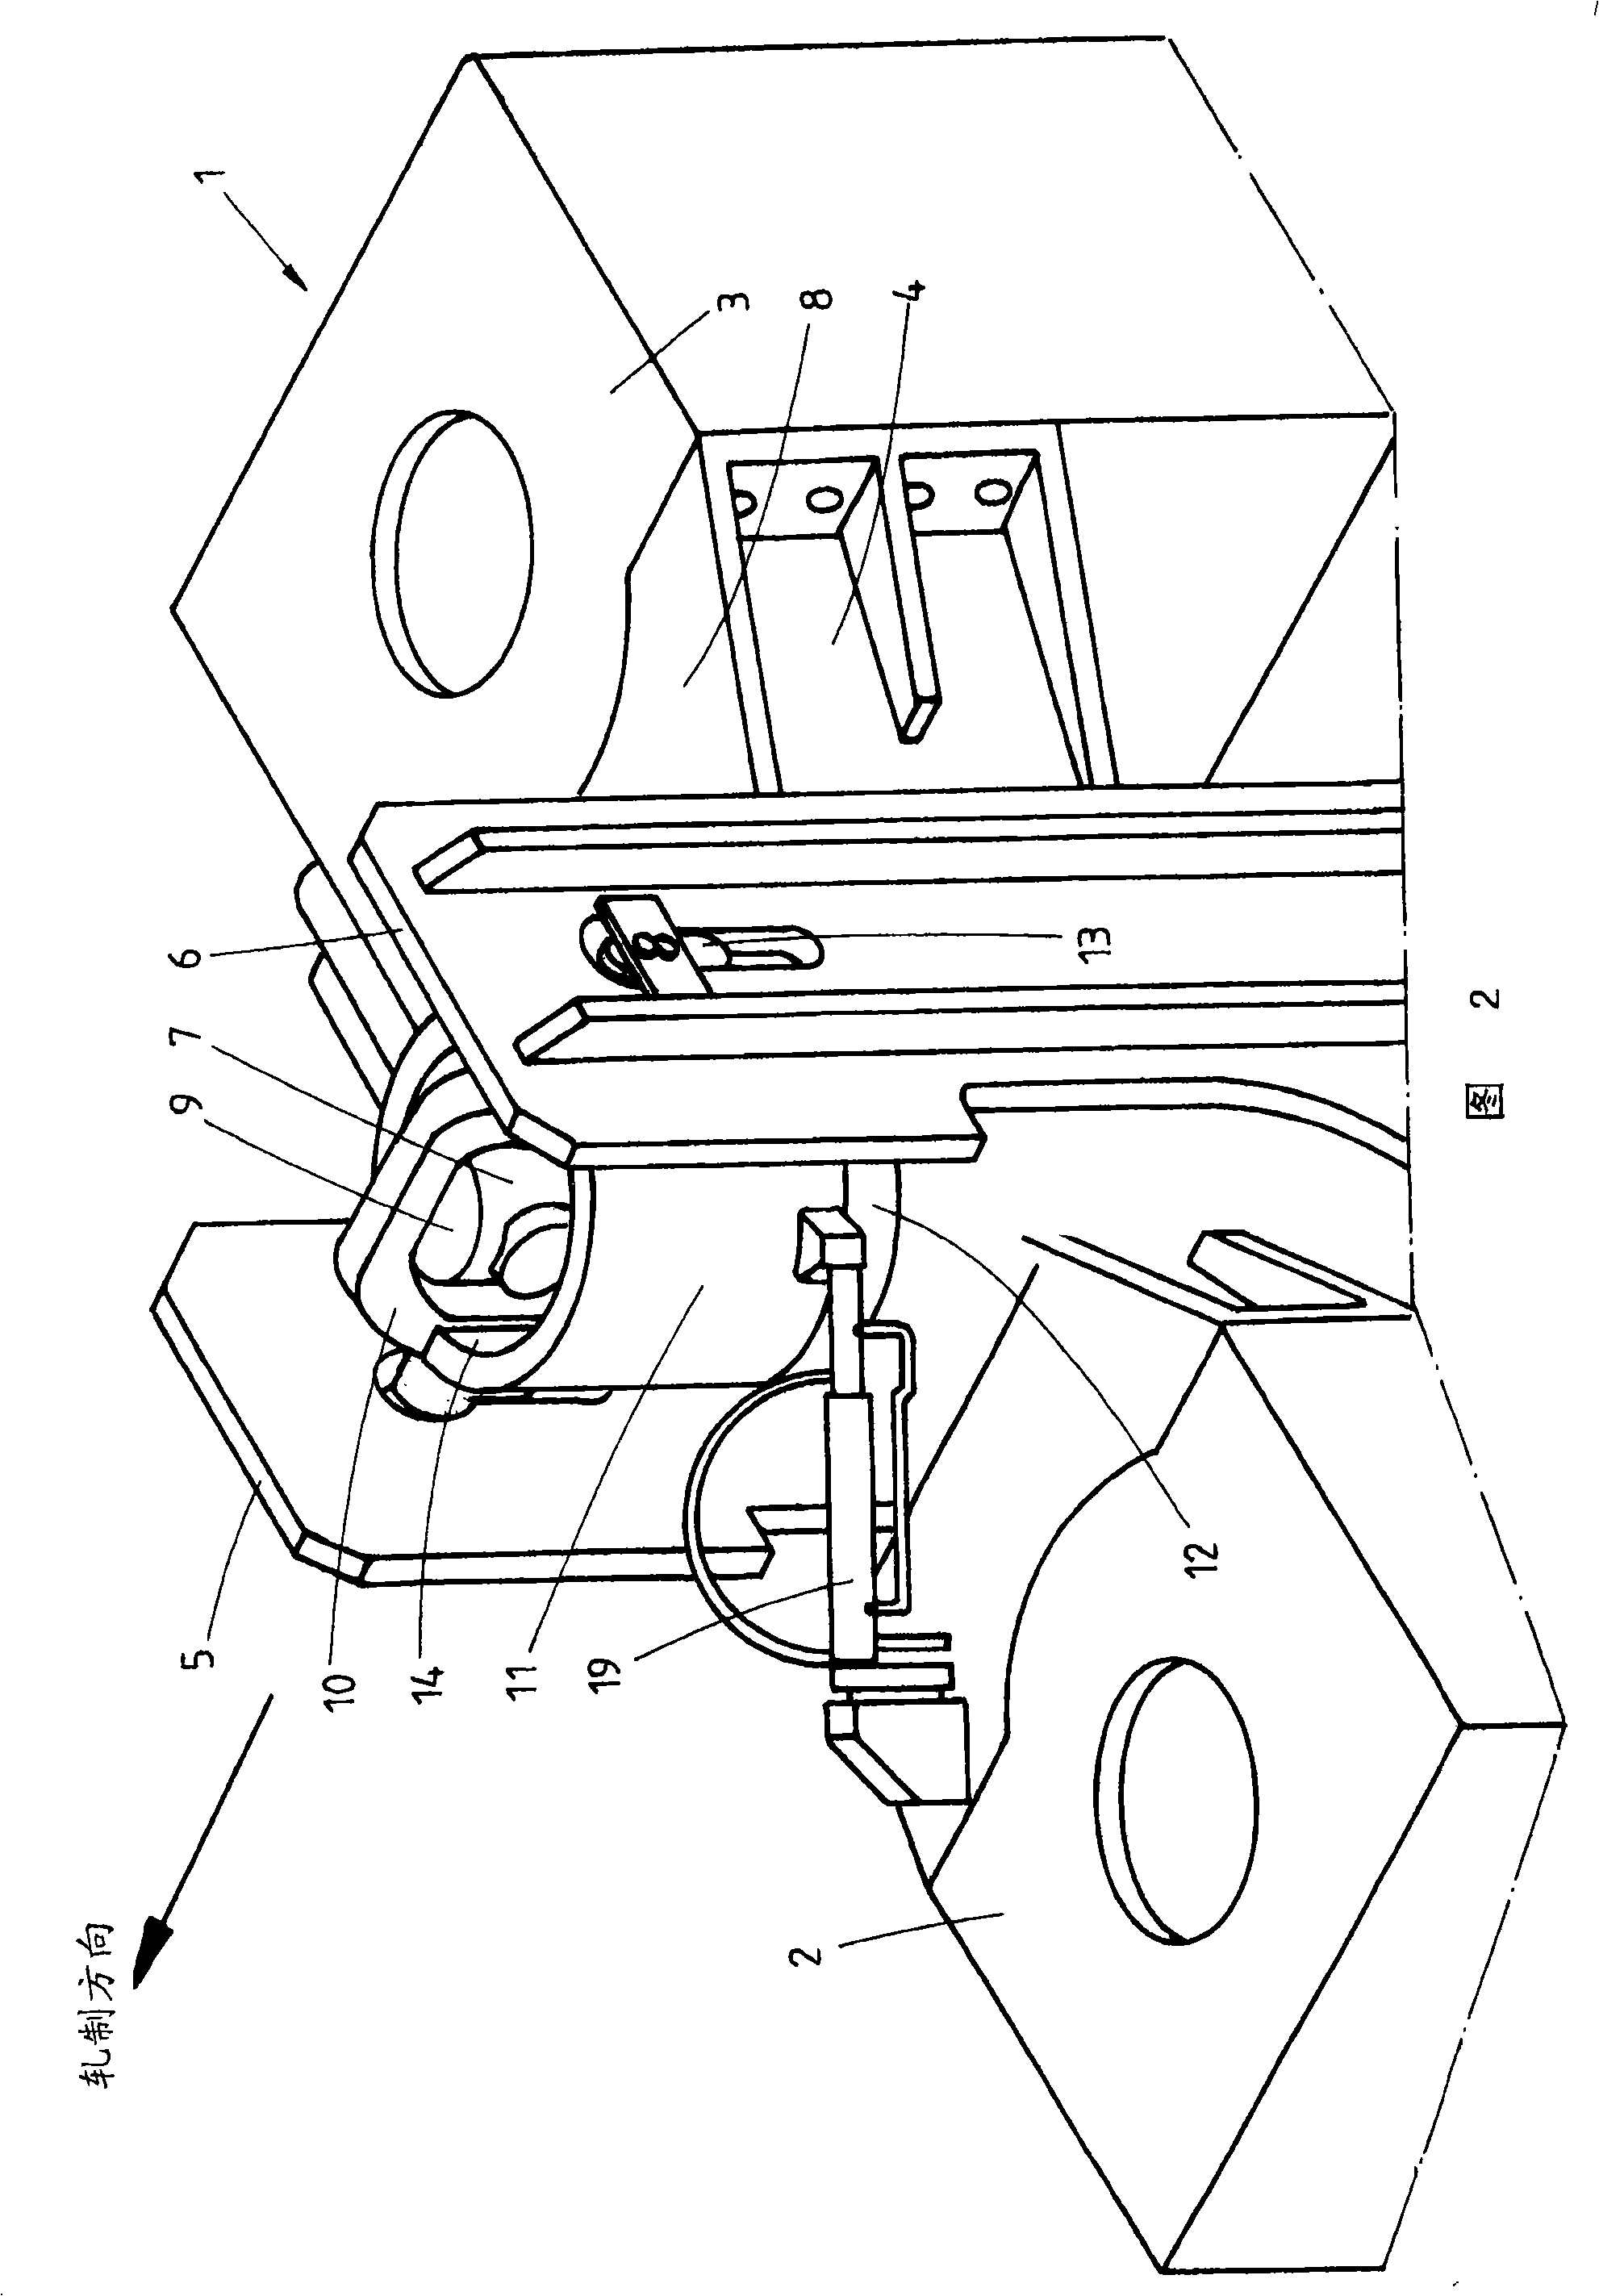 Device for rotationally locking the supporting roll balanced architecture of roll stands